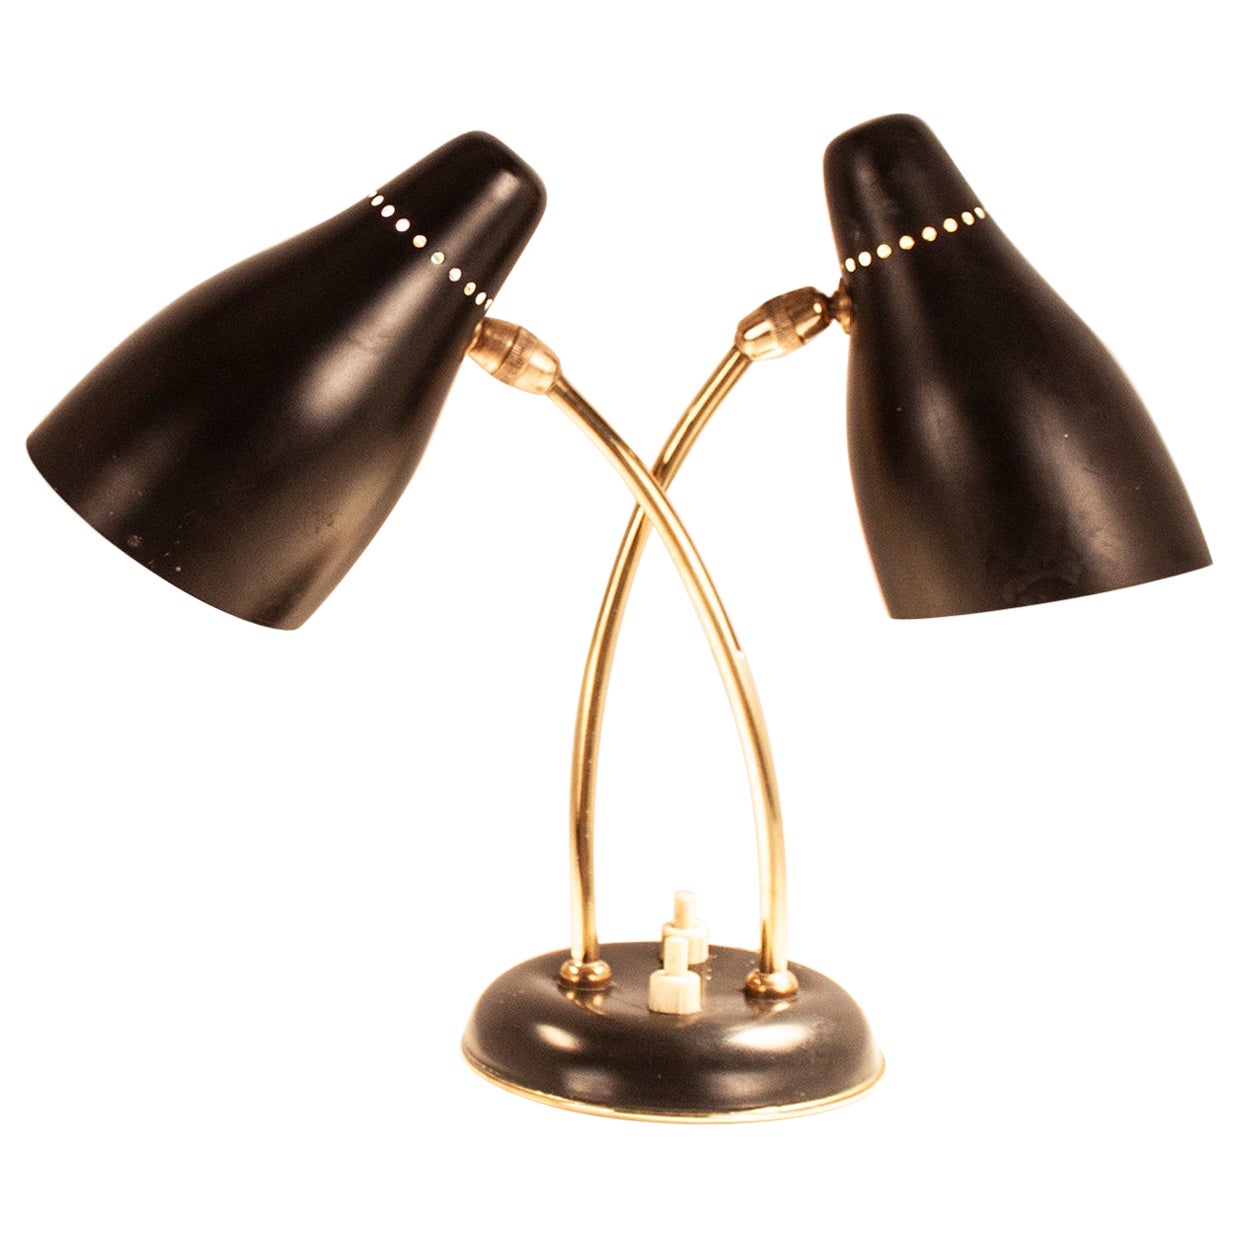  Midcentury Small Stilnovo Style Table Lamp Black Metal and Brass, Spain, 1950s